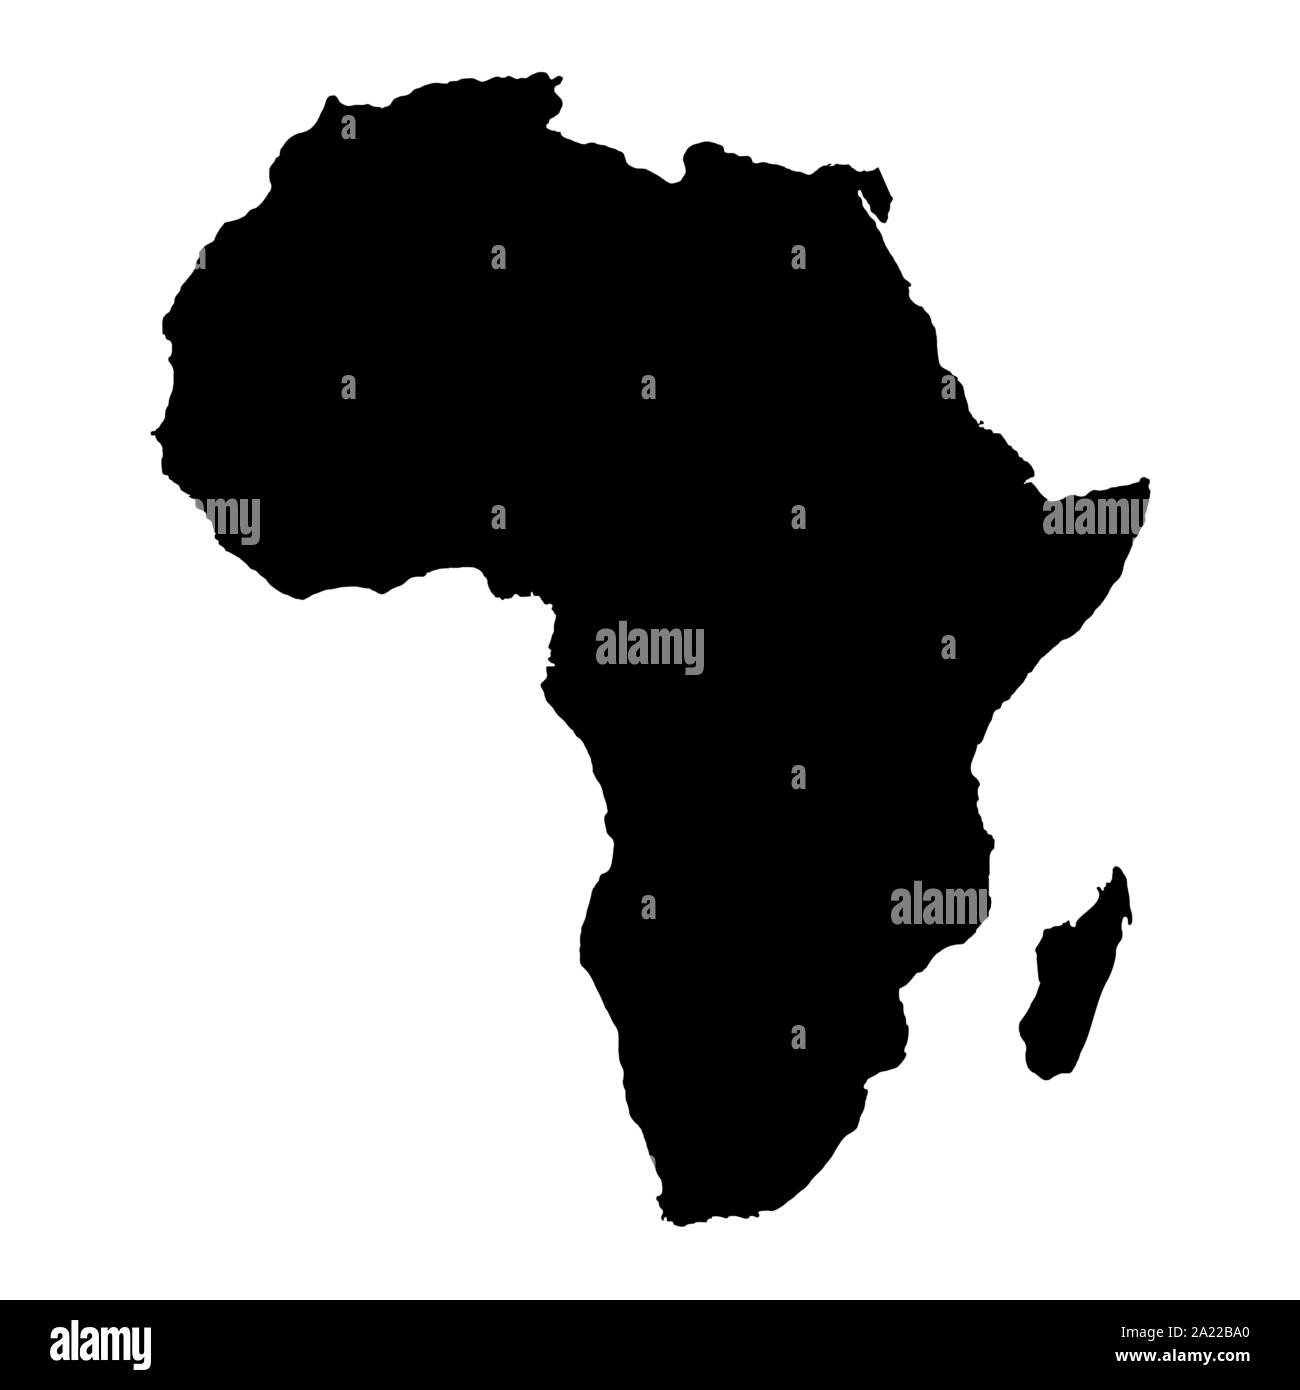 Africa silhouette map Stock Vector